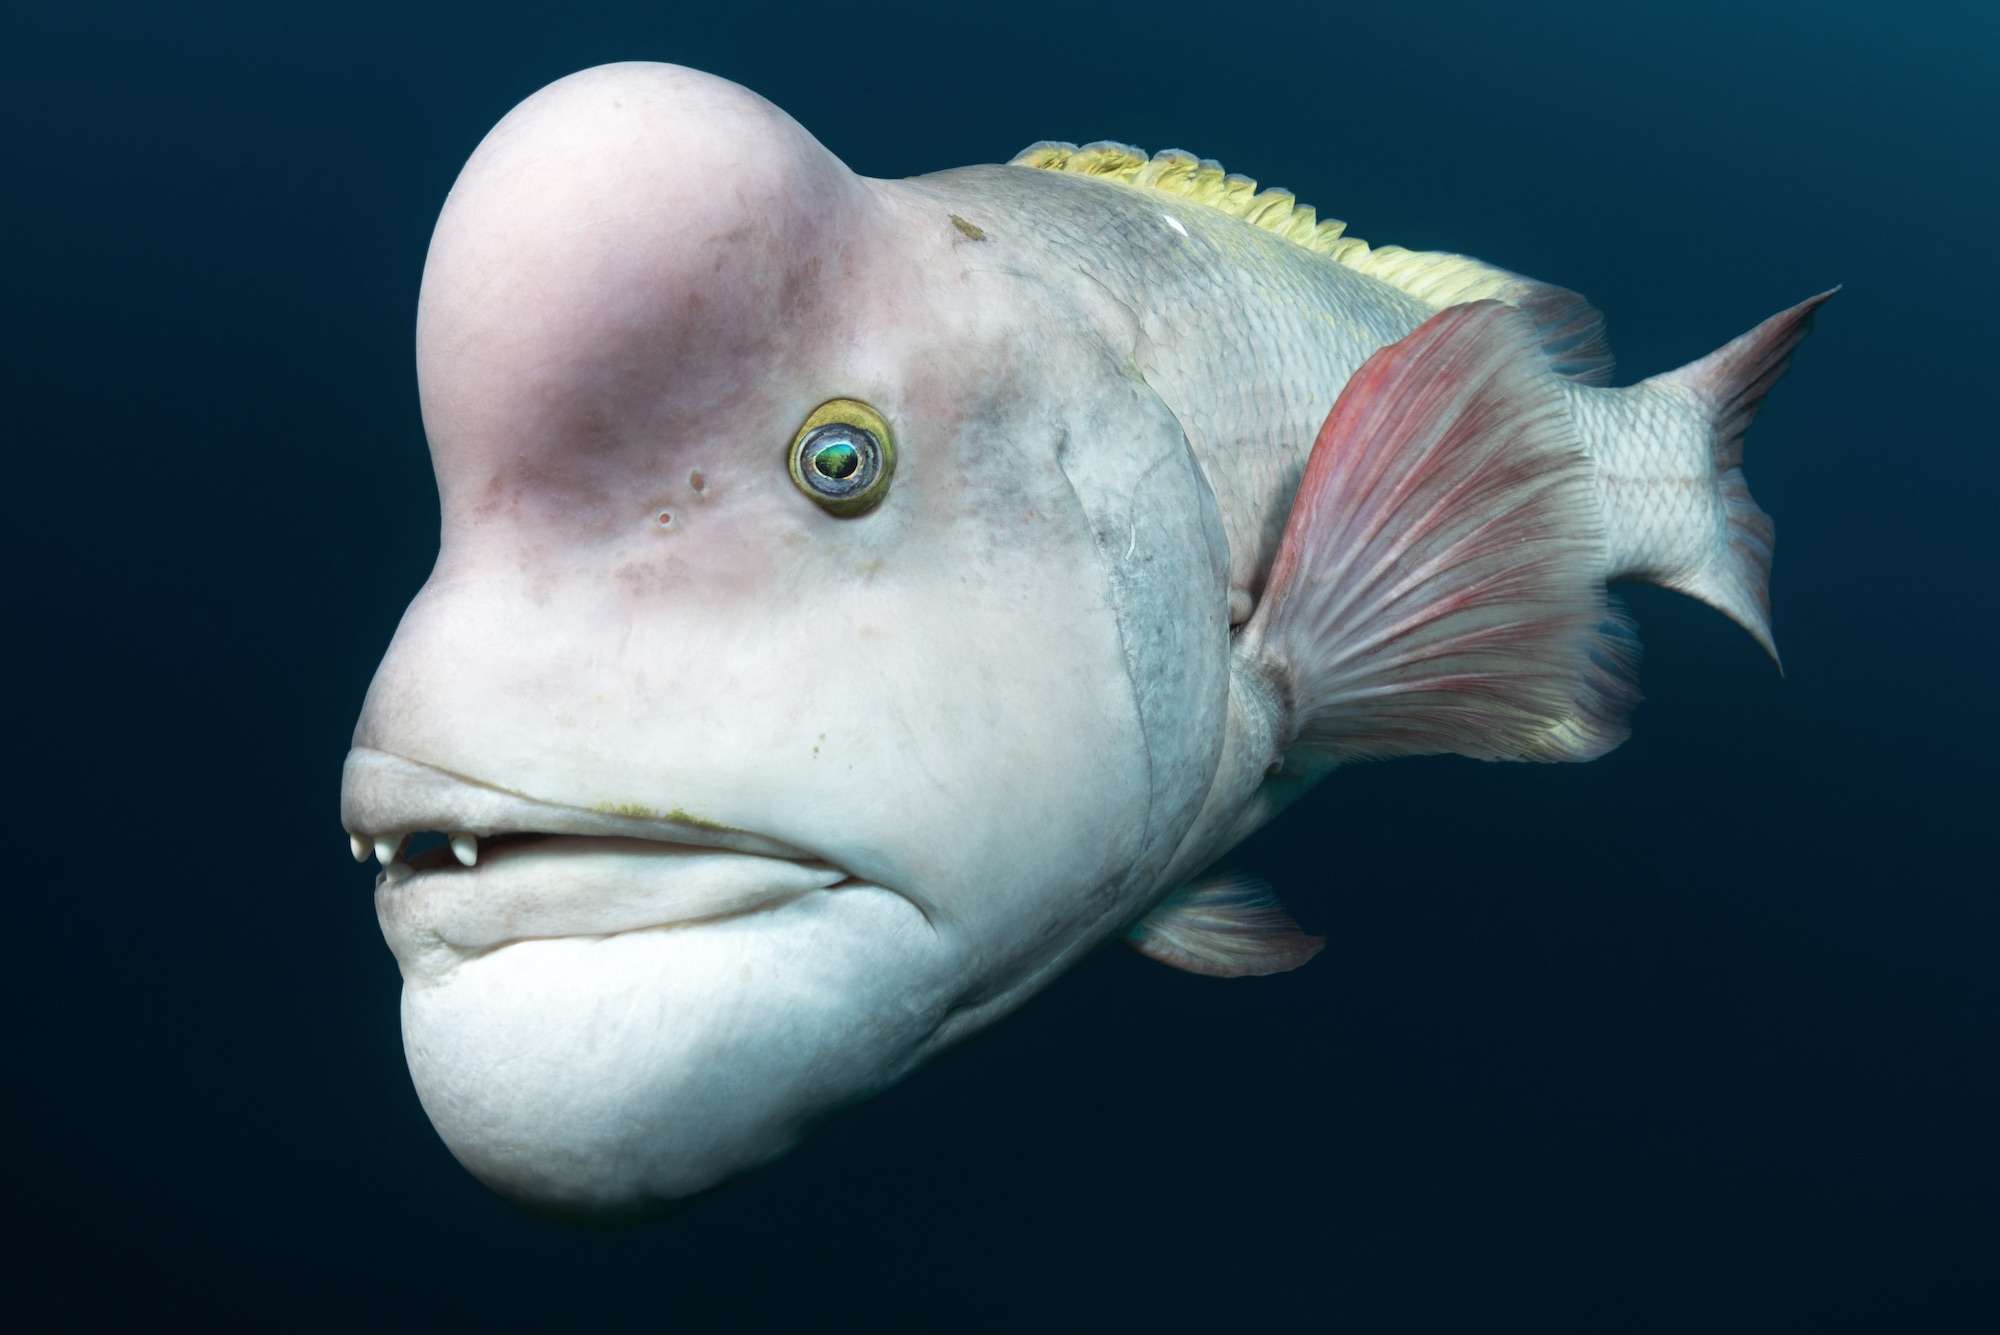 Underwater Photographer Tony Wu Was Tickled To Meet This Asian Sheepshead Wrasse Off The Coast Of Japans Sado Island The Fishs Forehead Reveals The Burning Desire Of A Male In Love He Said  